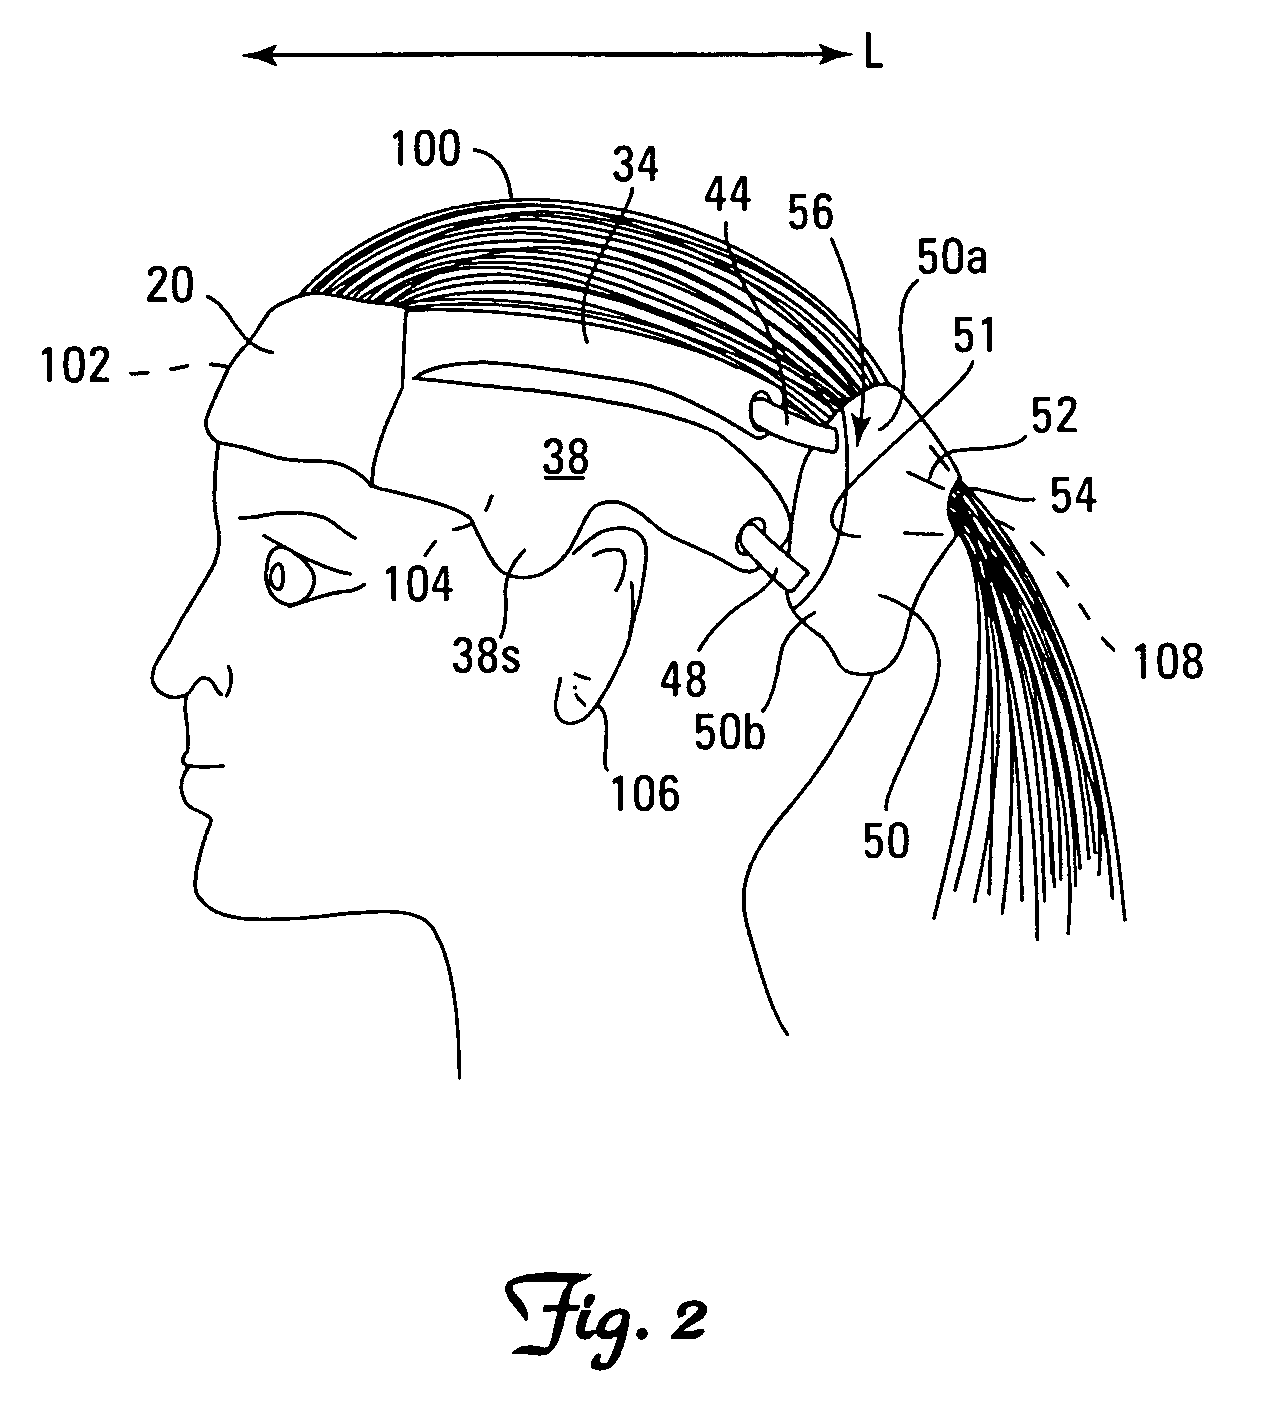 Headguard with an eccentric dimple for accommodating the occipital bone